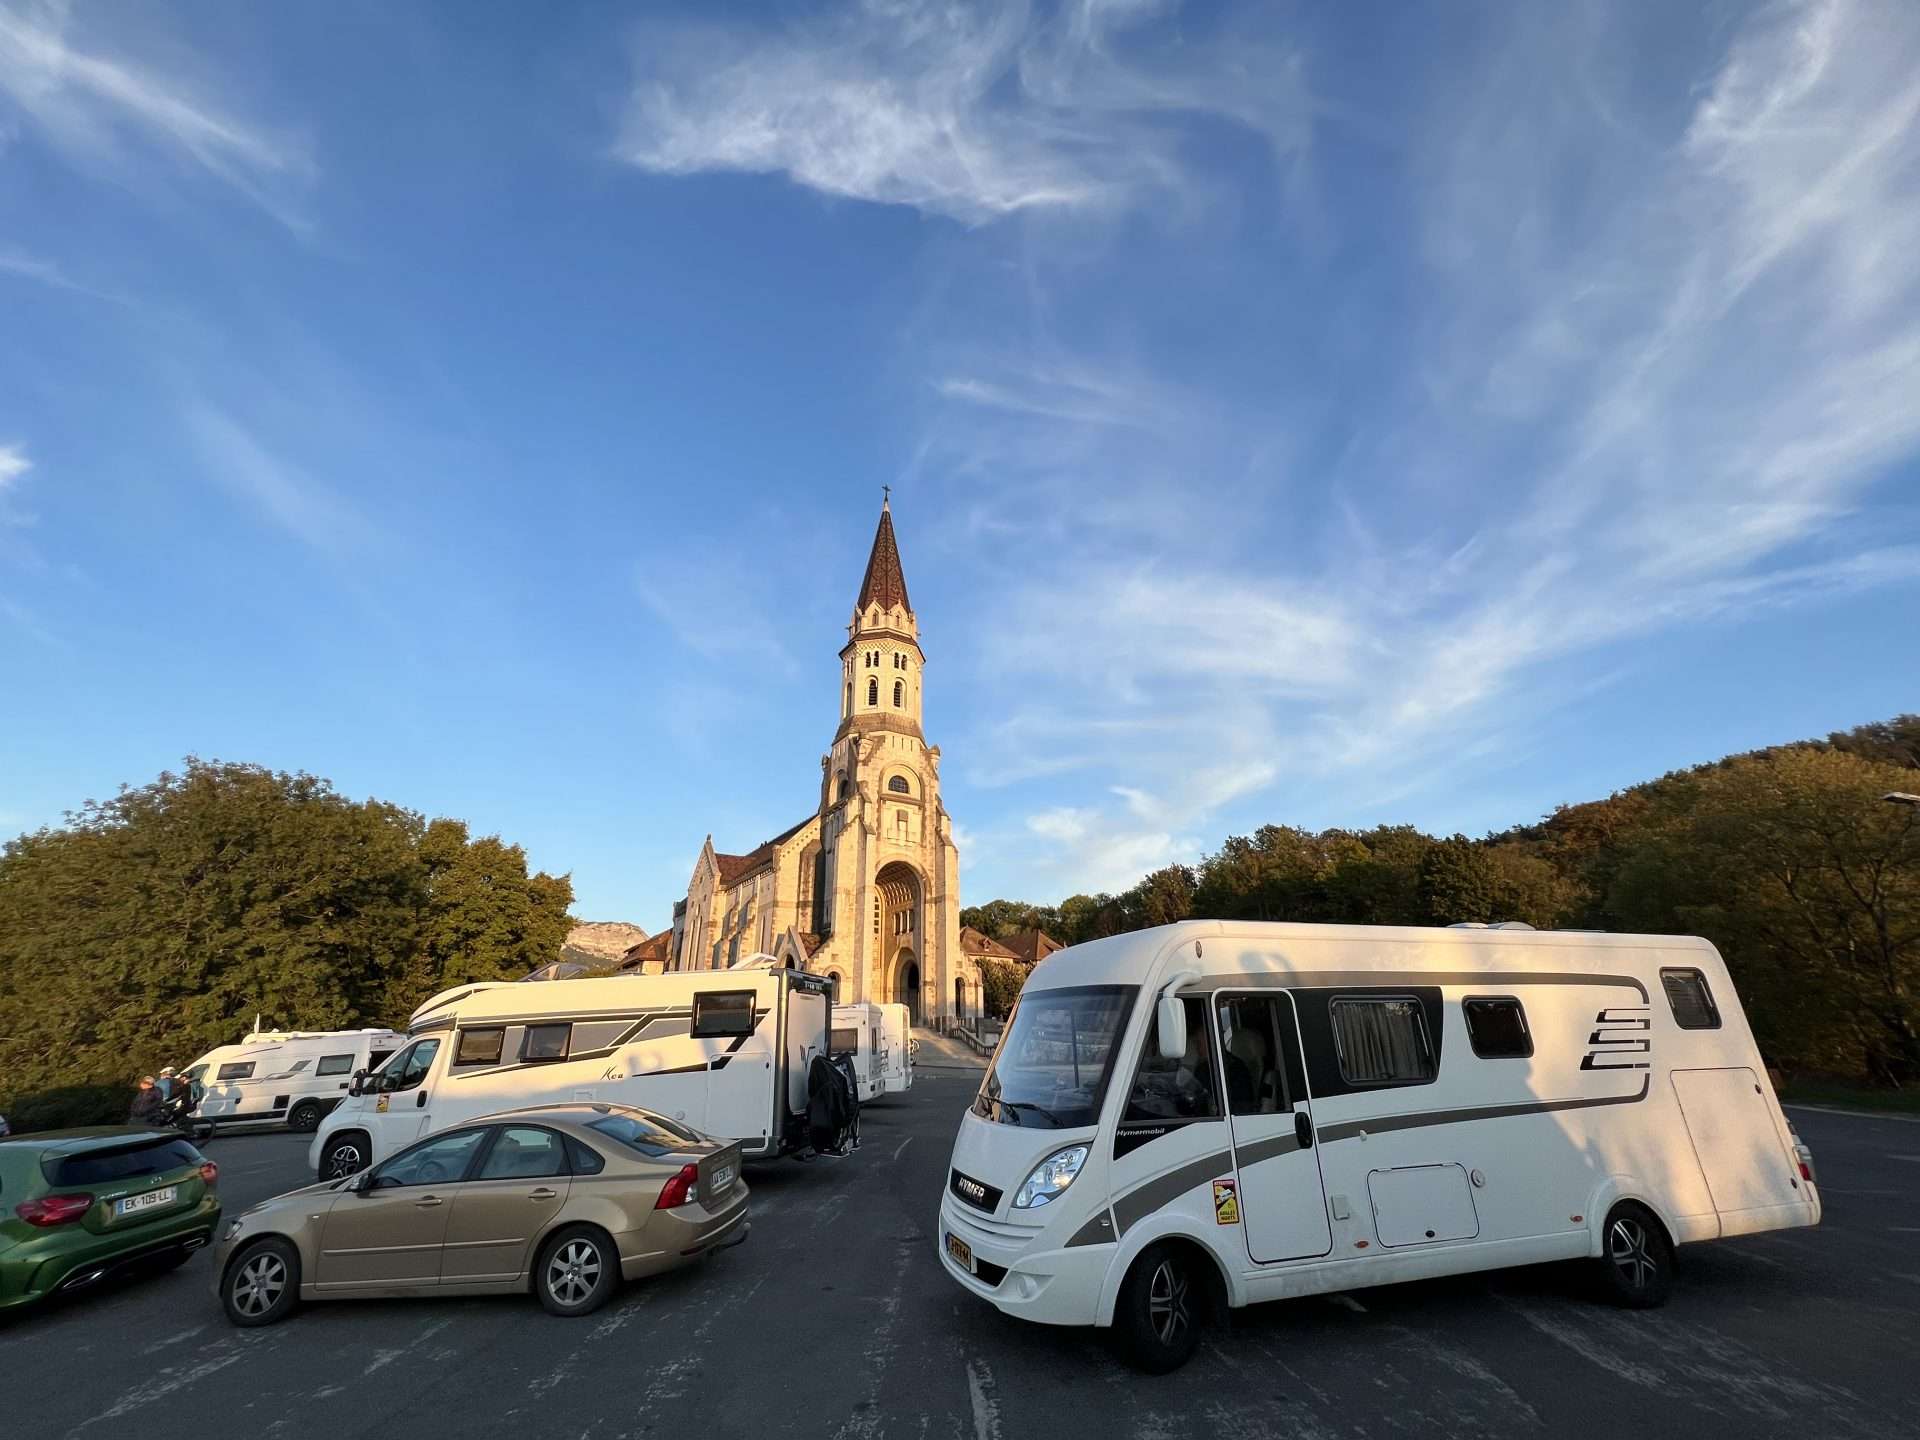 Church parking lot with RVs overnight parking